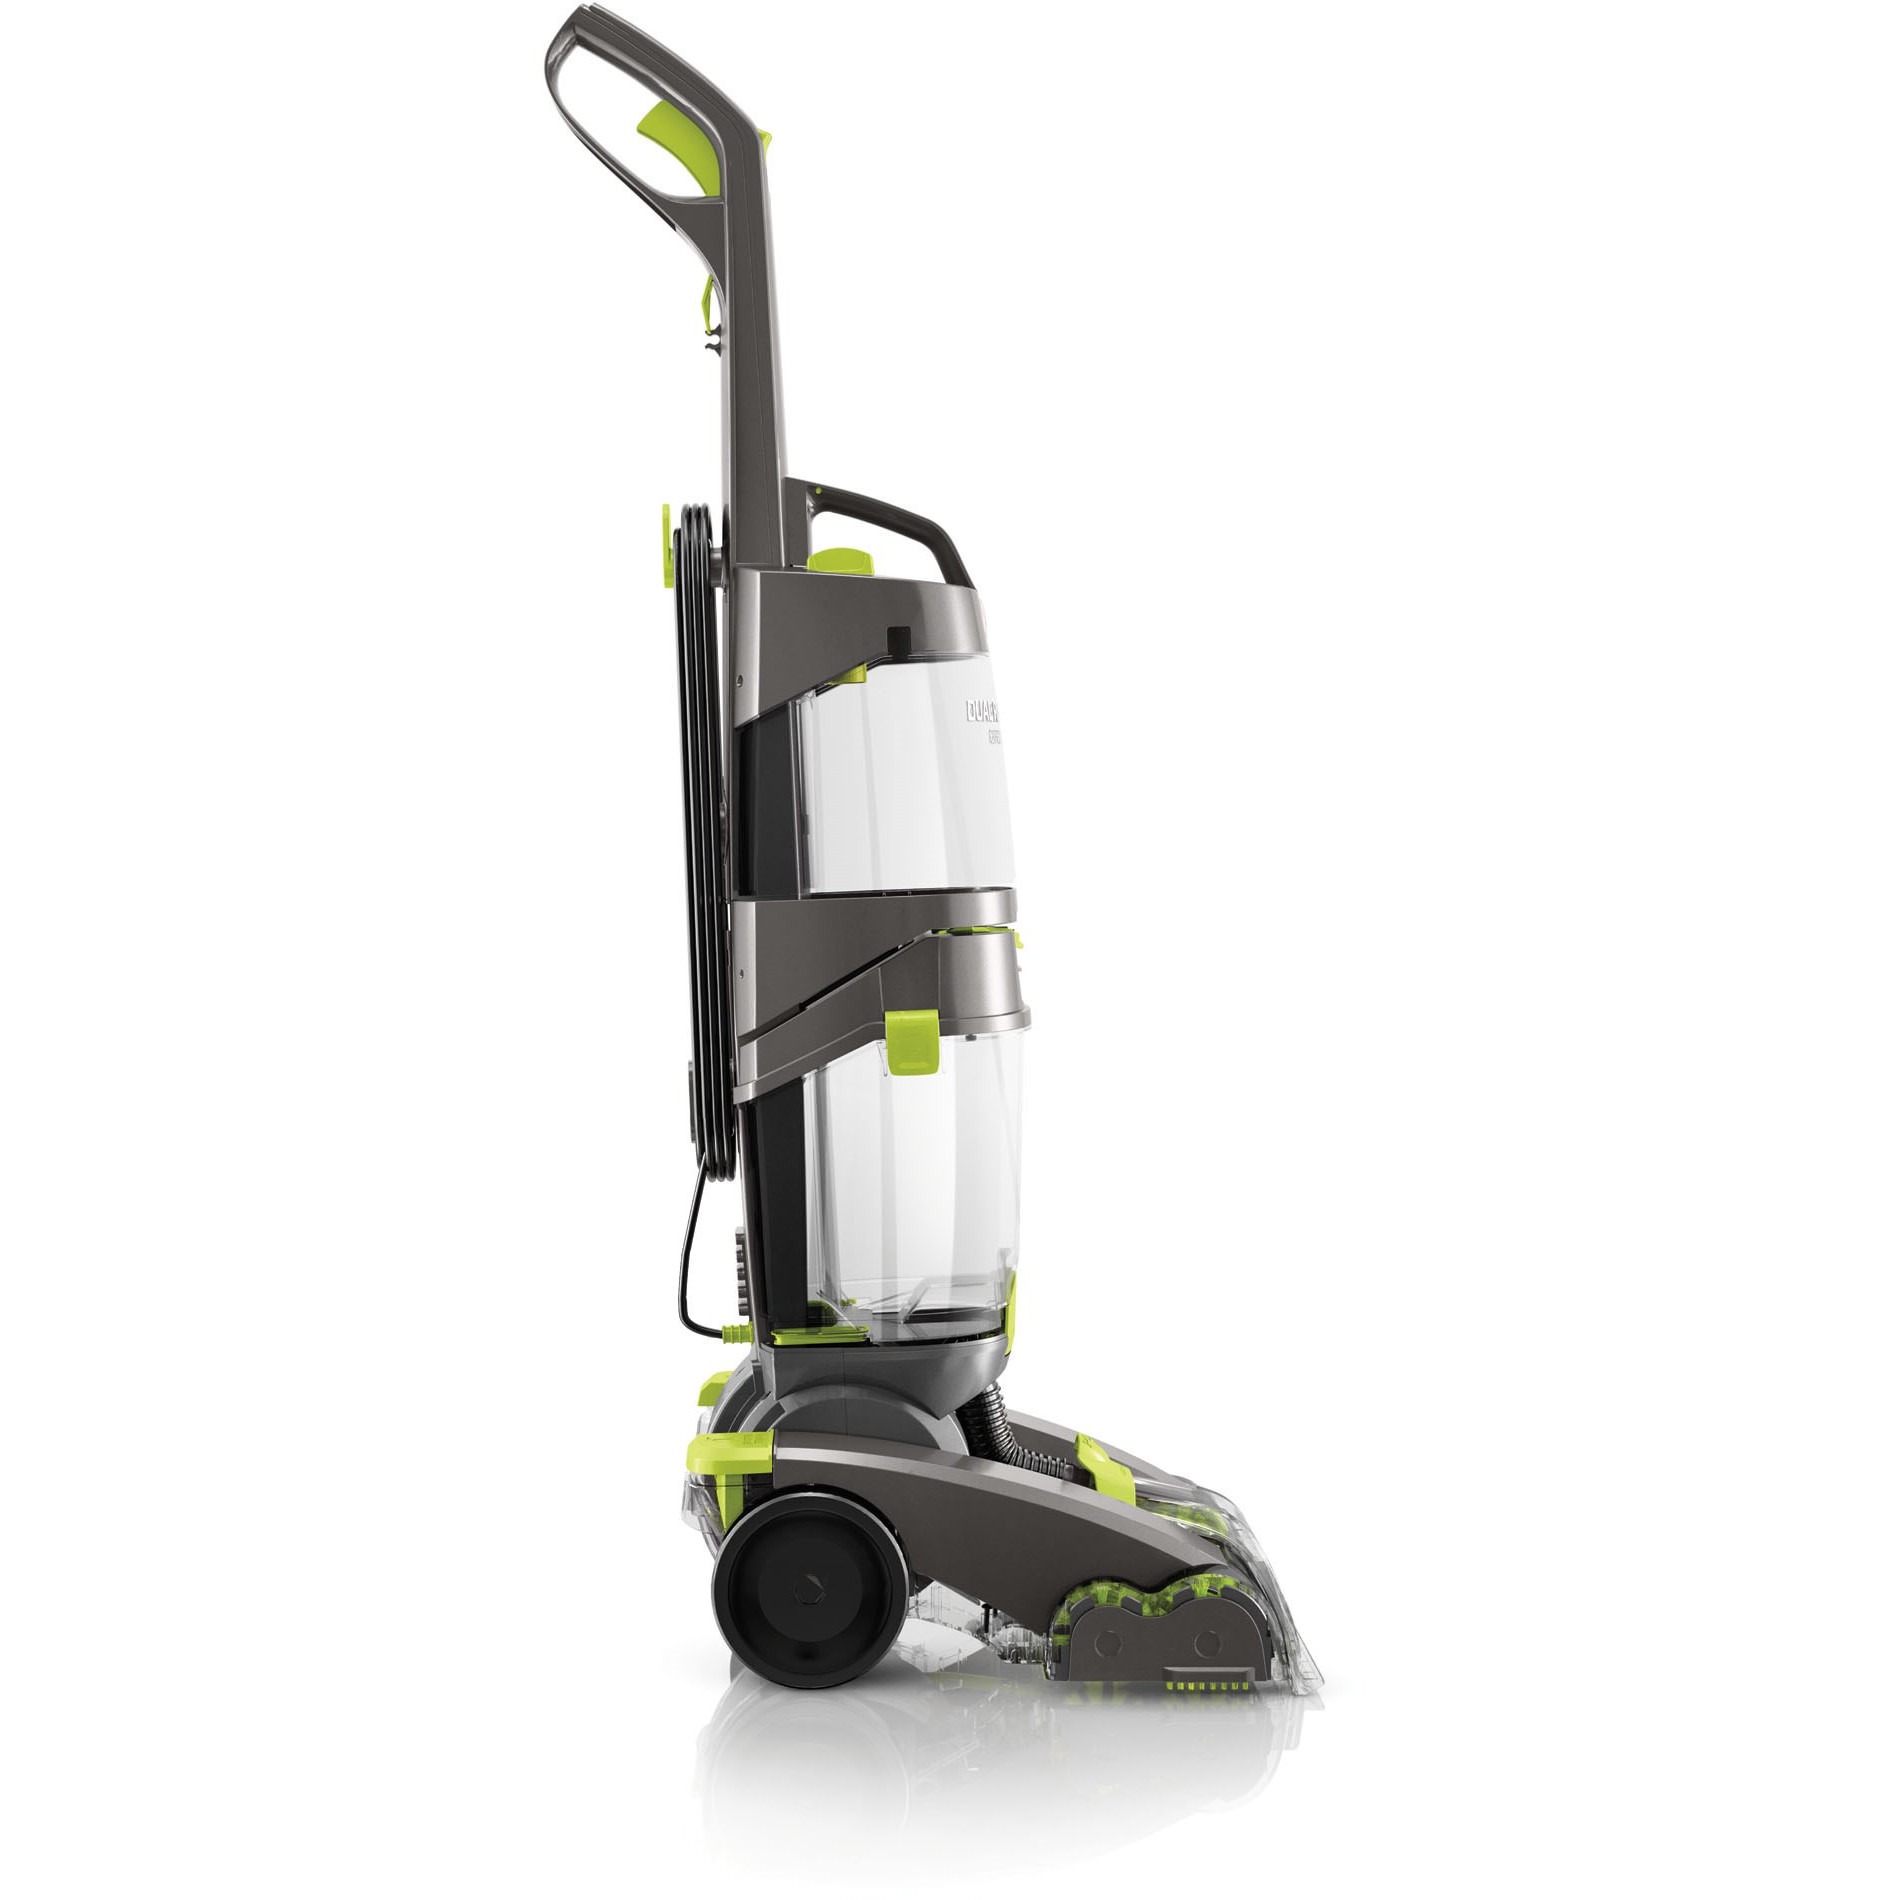 Hoover FH51000 Dual Power Max Upright Carpet Cleaner - image 5 of 5